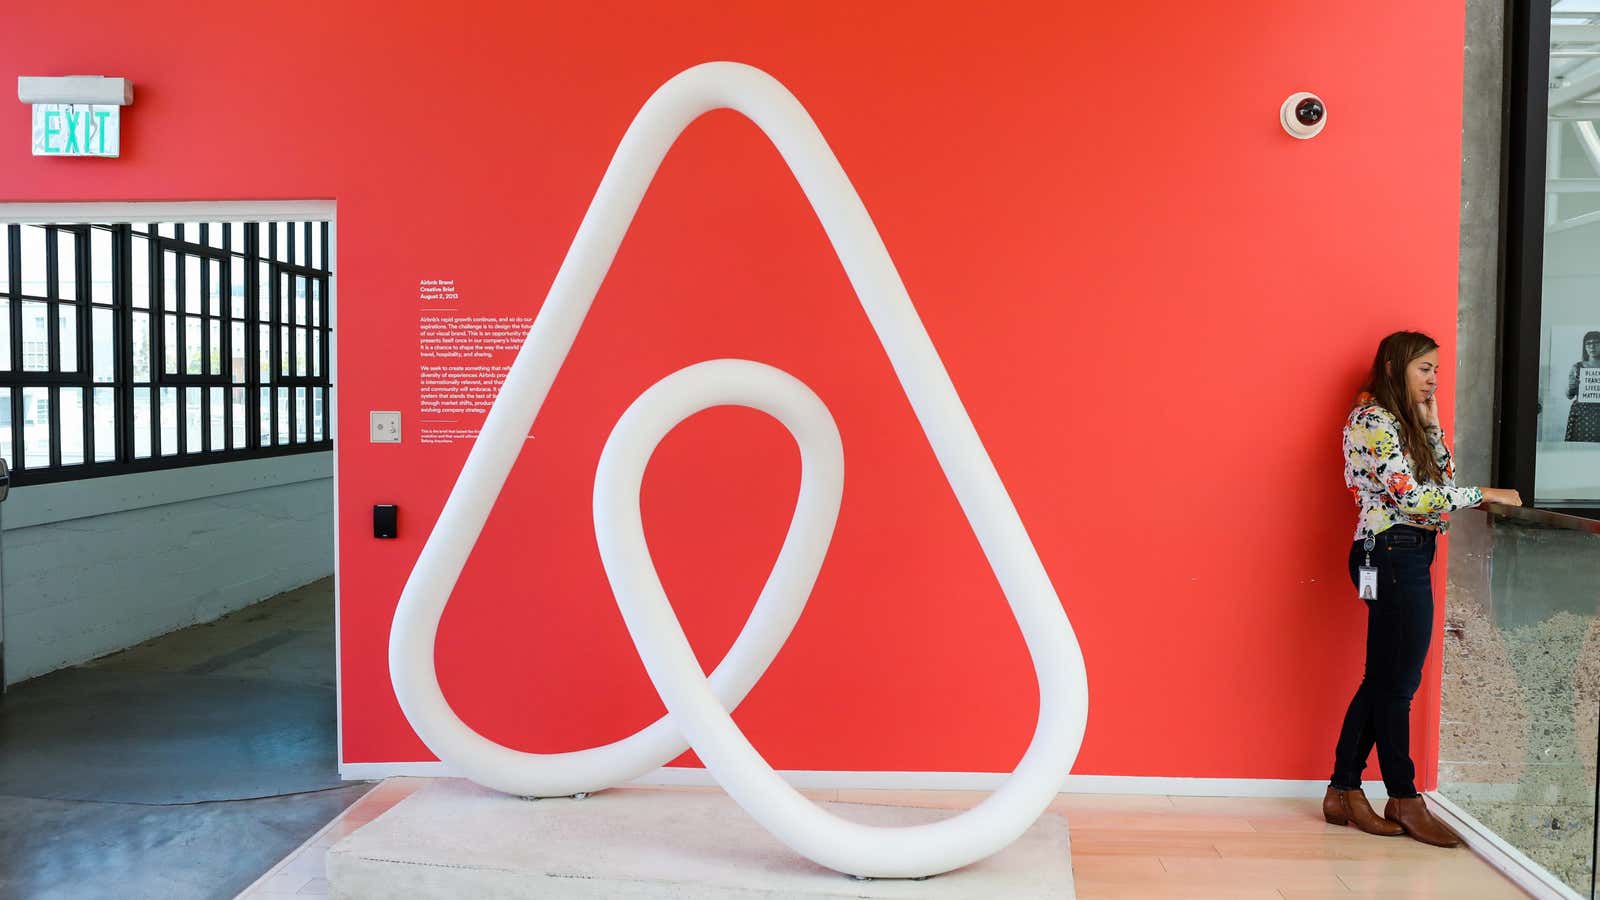 Take in the sculpture of Airbnb’s logo.